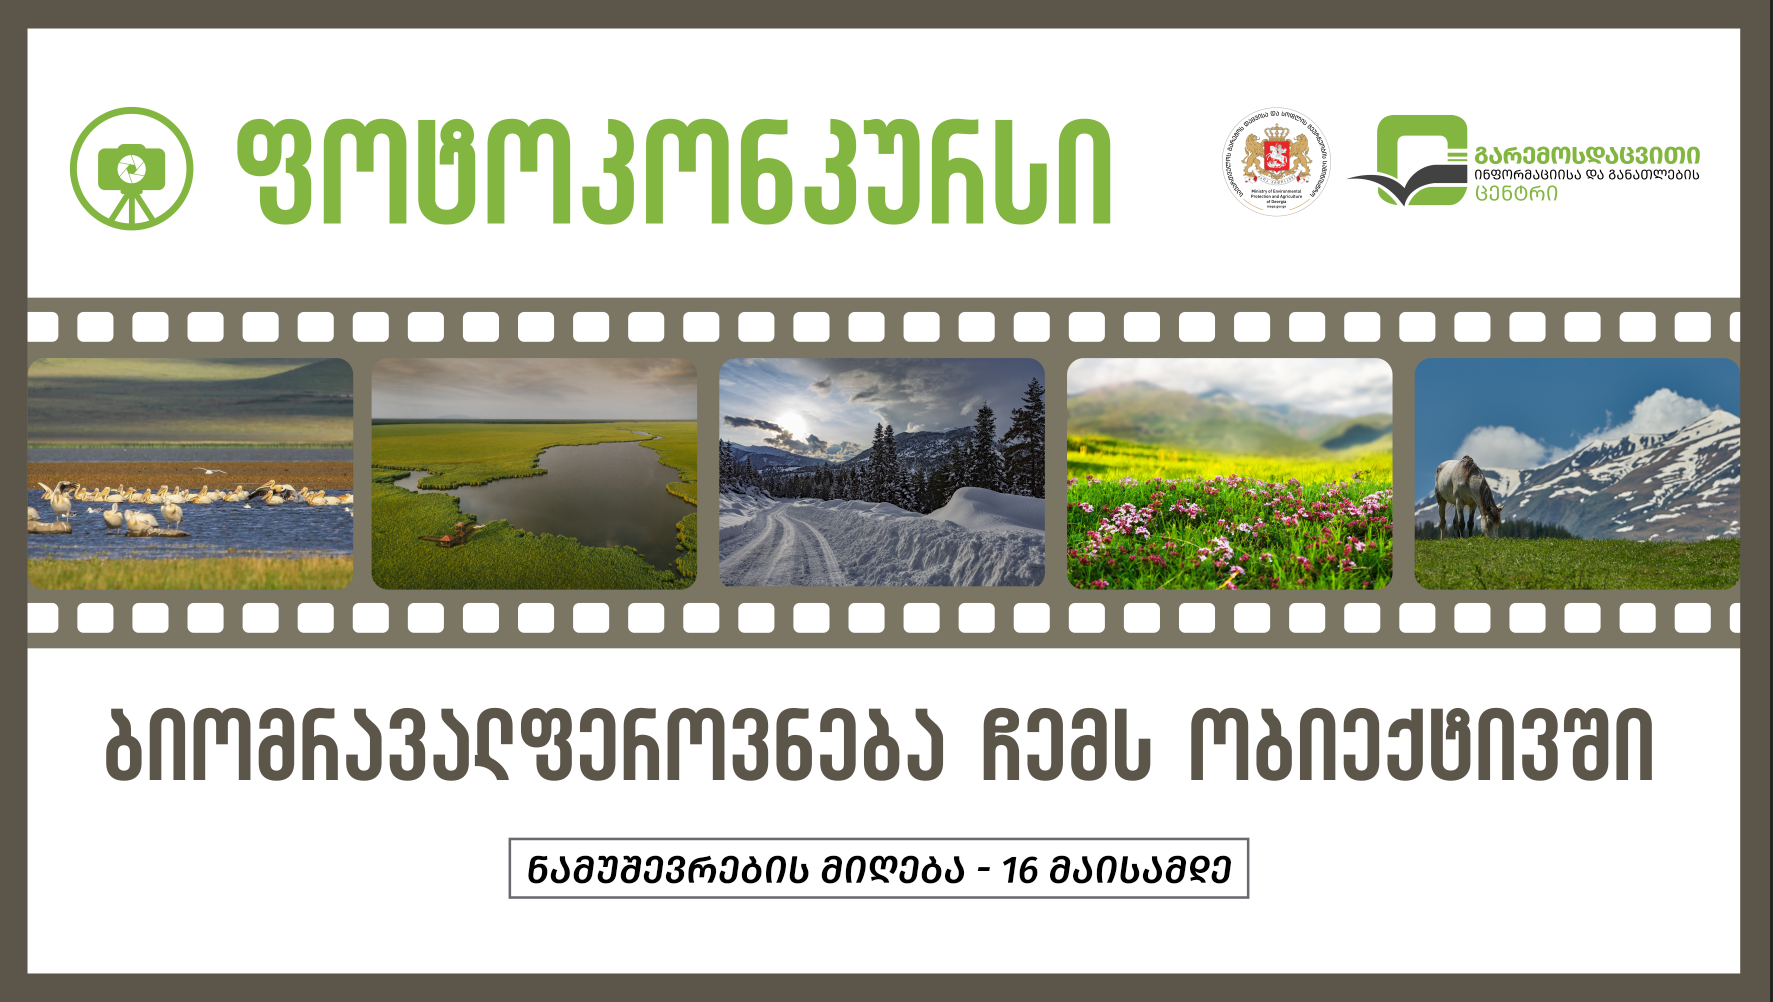 The EIEC is holding a photo contest called "Biodiversity in My Lens"